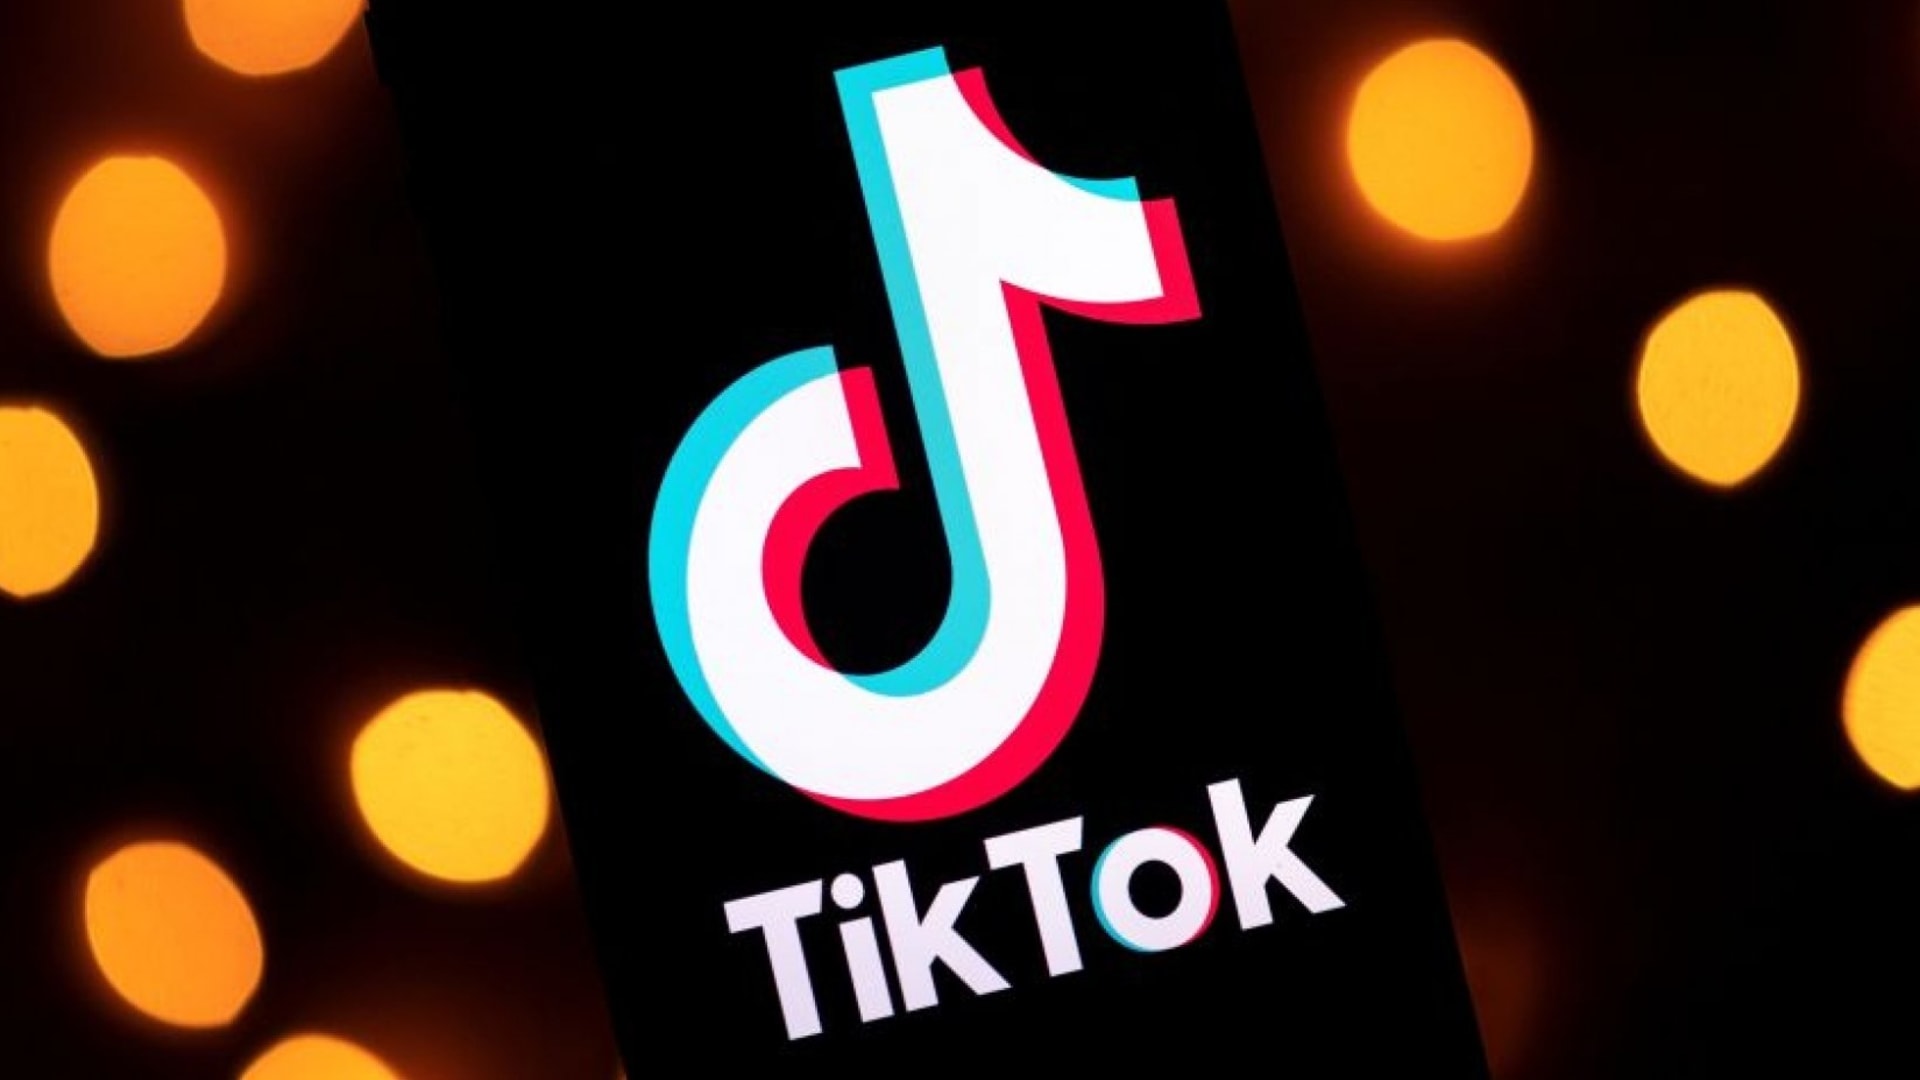 TikTok Just Ended Google's 15 Year Reign as the World's Most Popular Web Domain